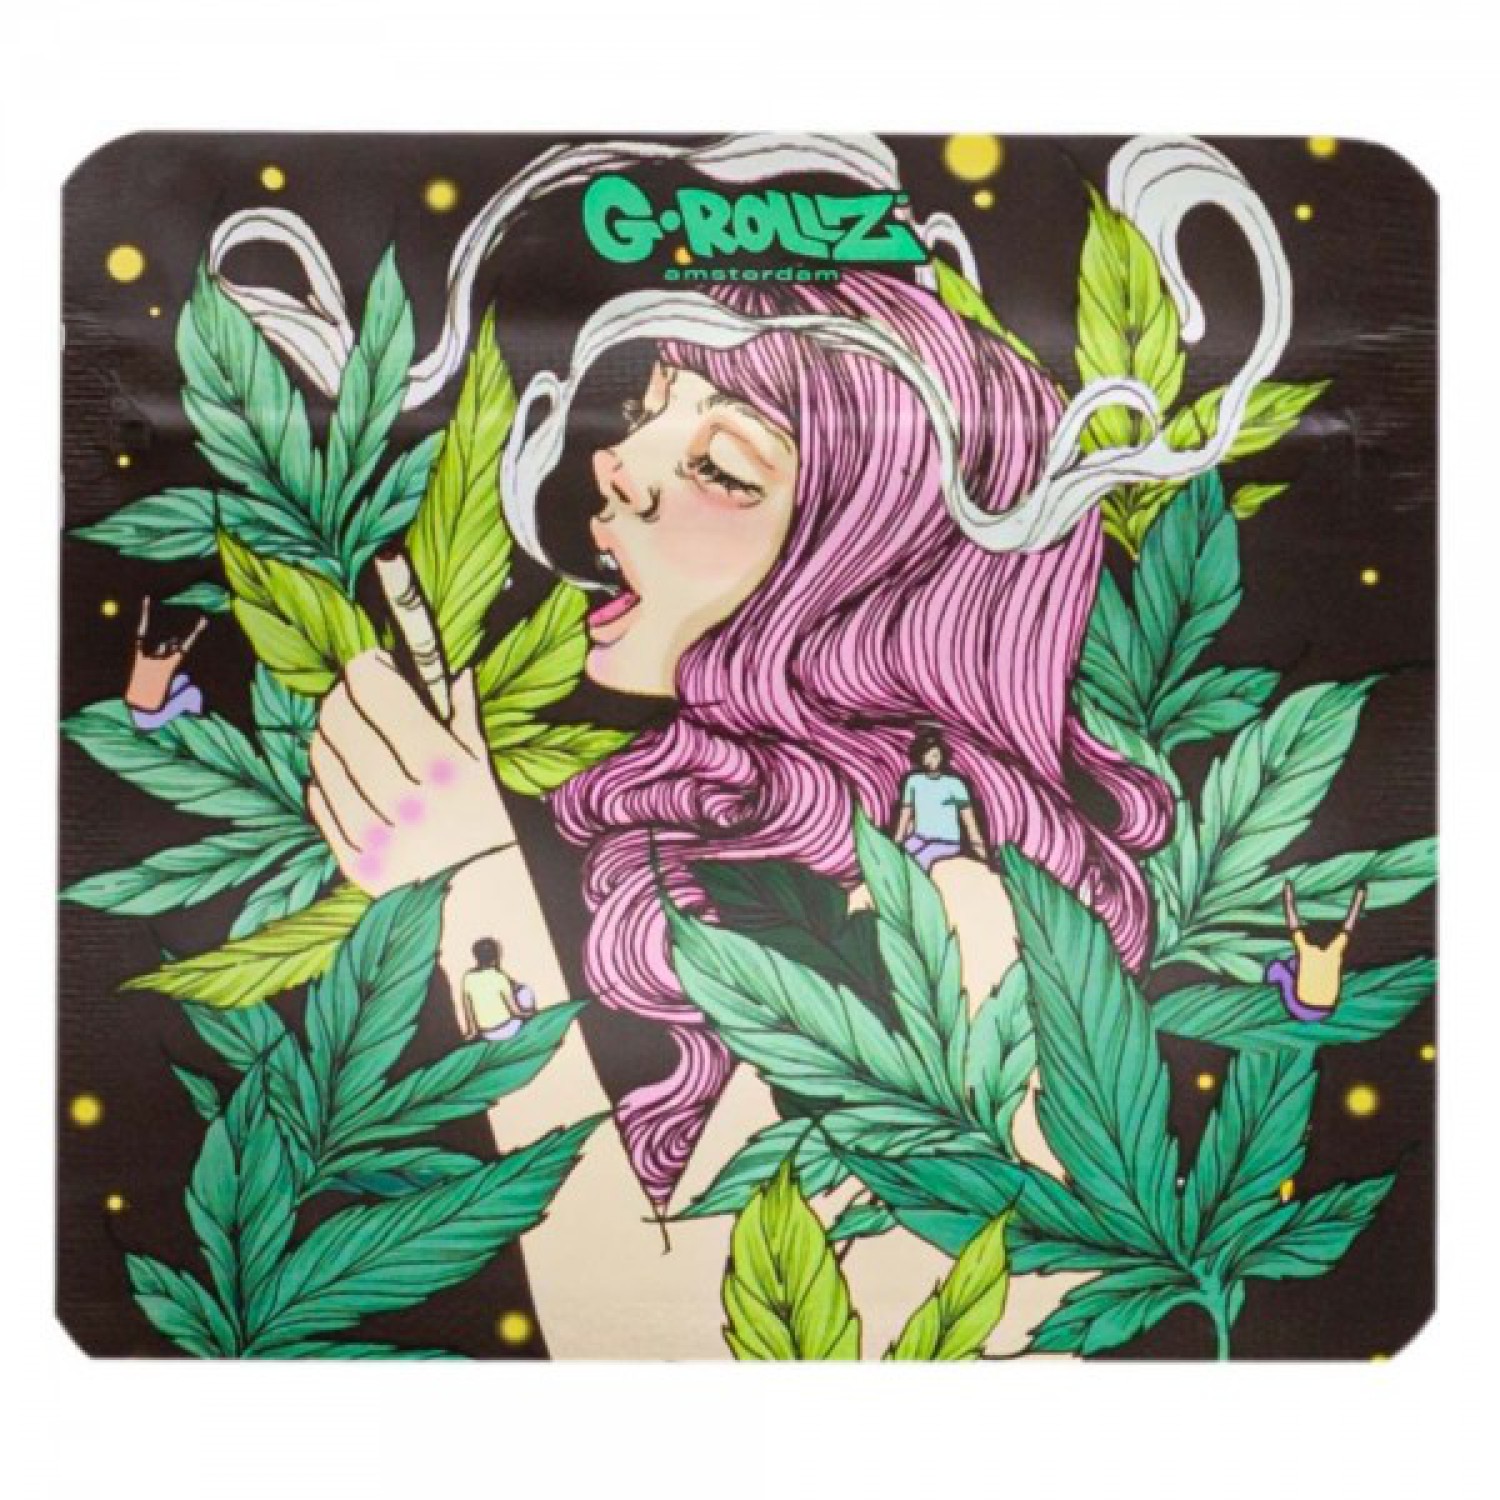 G-Rollz | 'Smoking Girl' Smell Proof Bags 90 x 80mm - 10pcs in Display